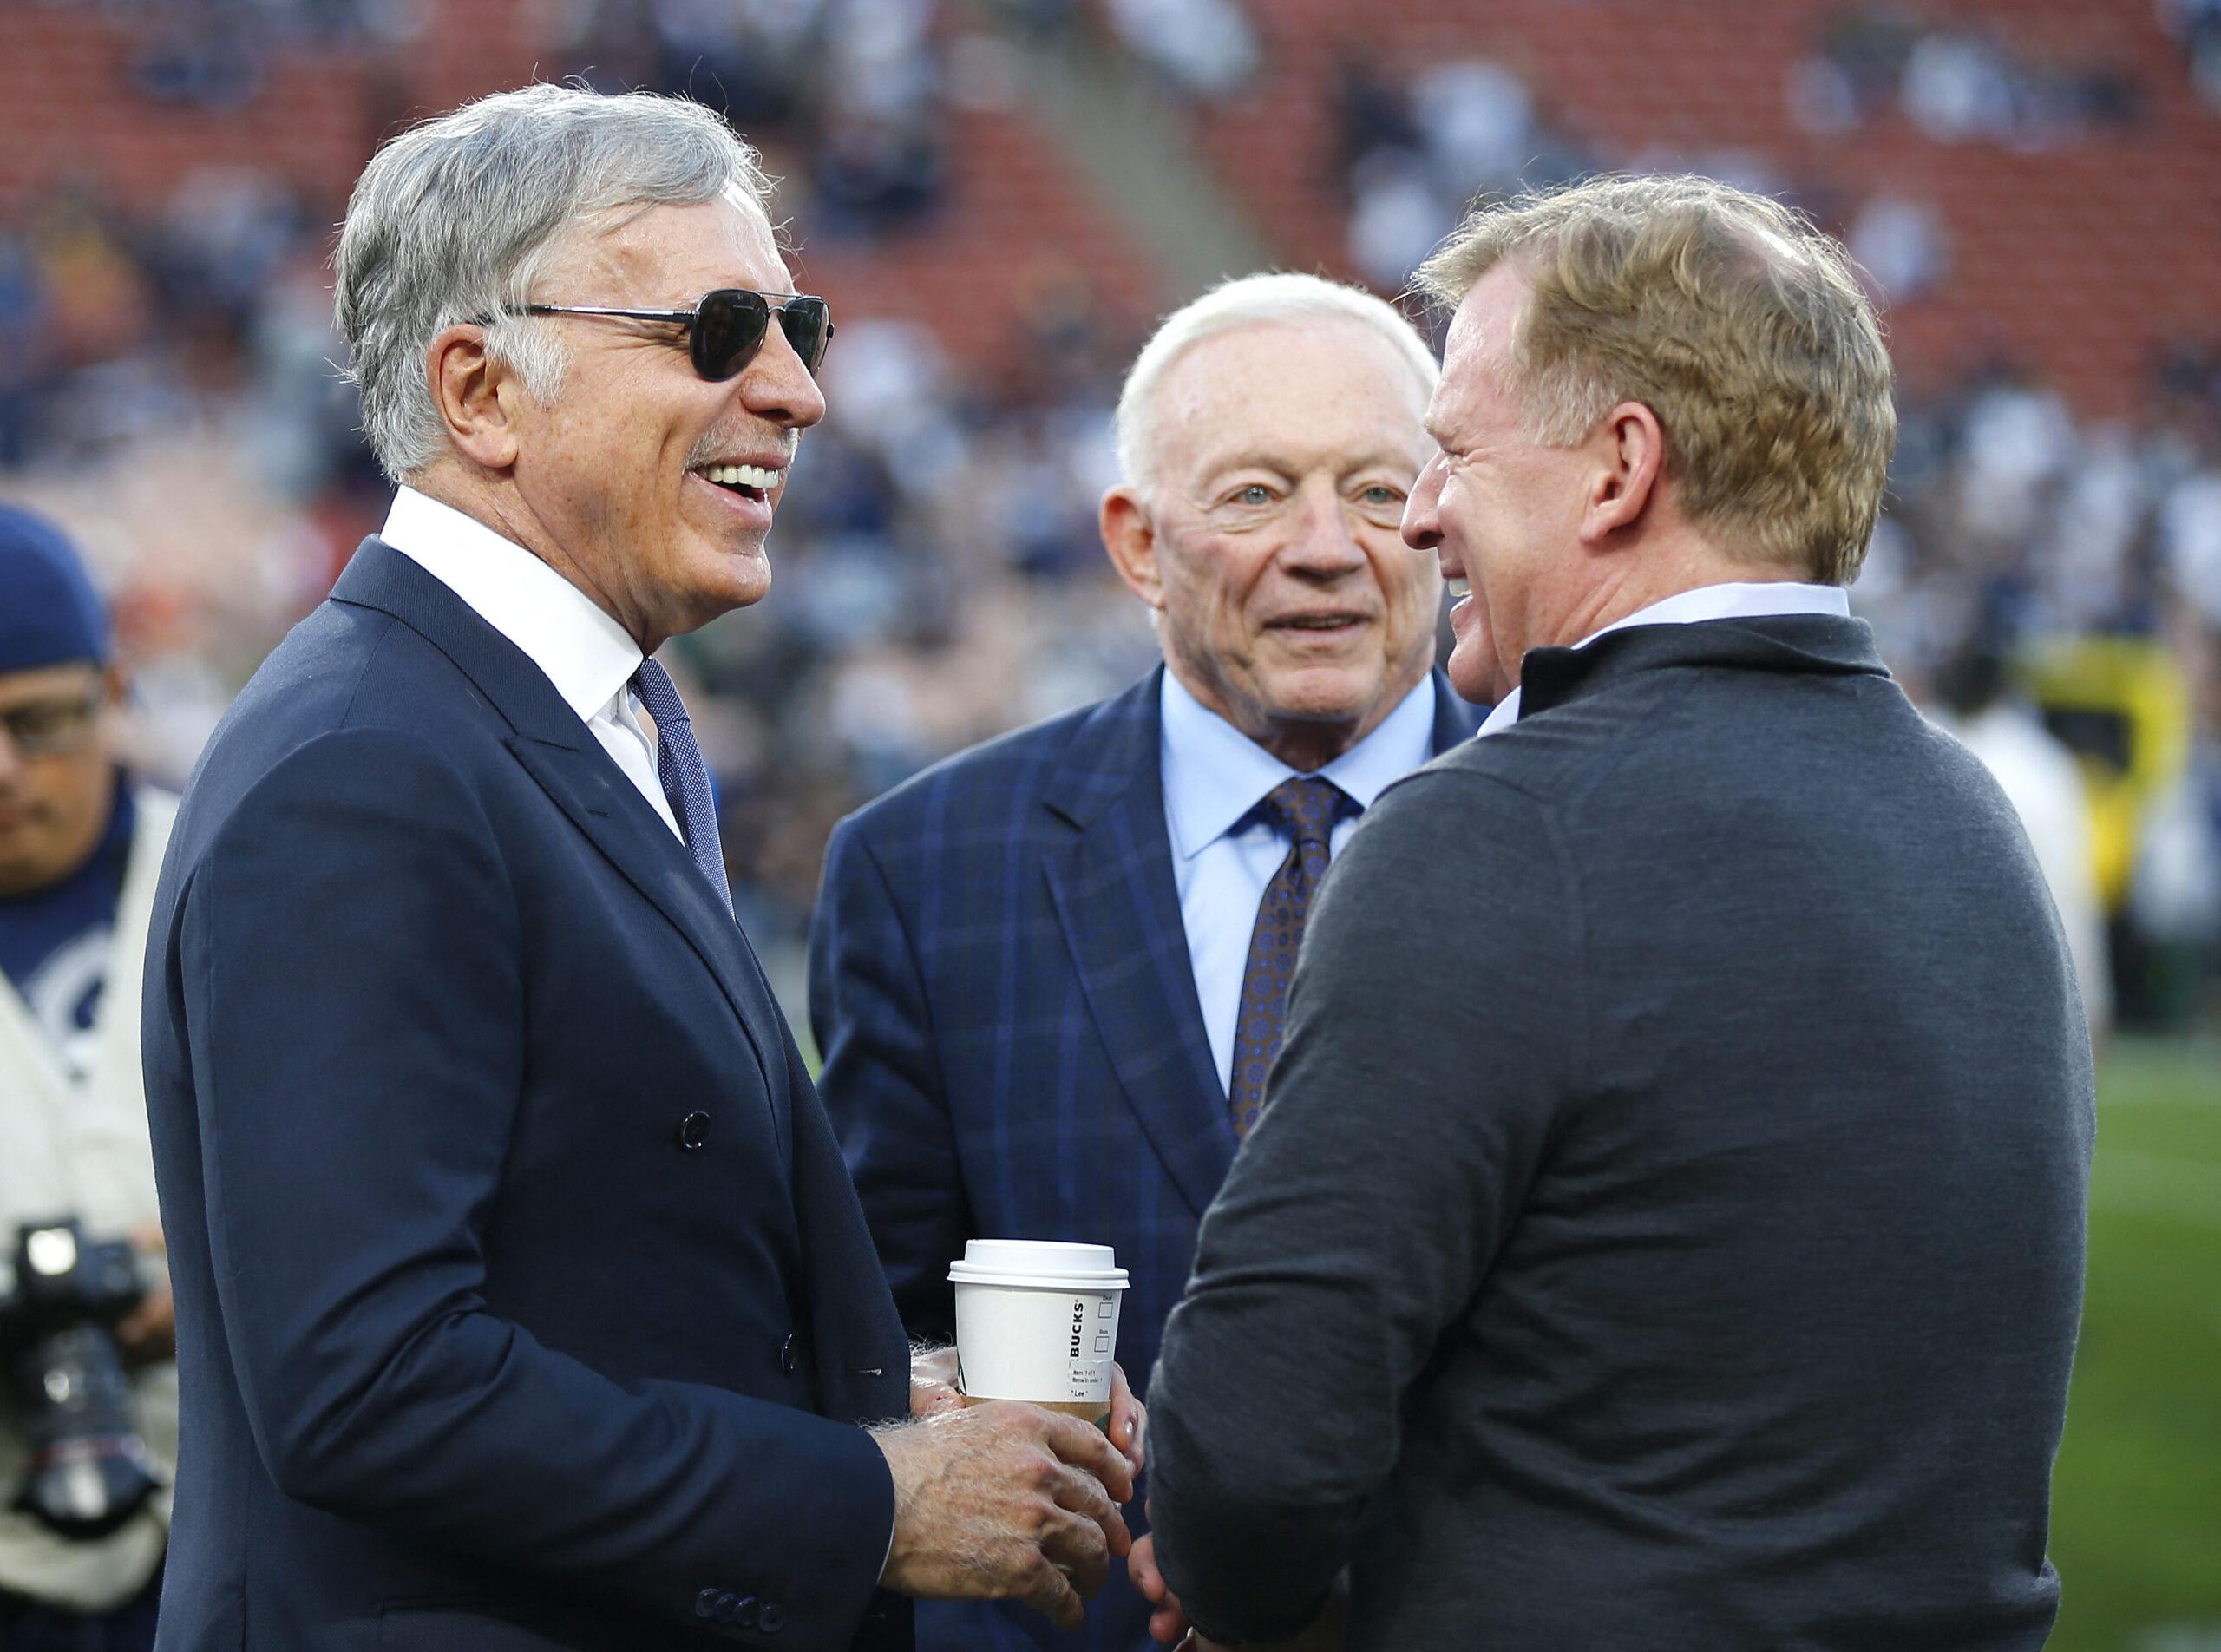 Los Angeles Rams owner Stan Kroenke, left, Dallas Cowboys owner Jerry Jones, and NFL Commissioner Roger Goodell talk before a NFC Divisional playoff game at the Los Angeles Memorial Coliseum. The Rams won 30-22.